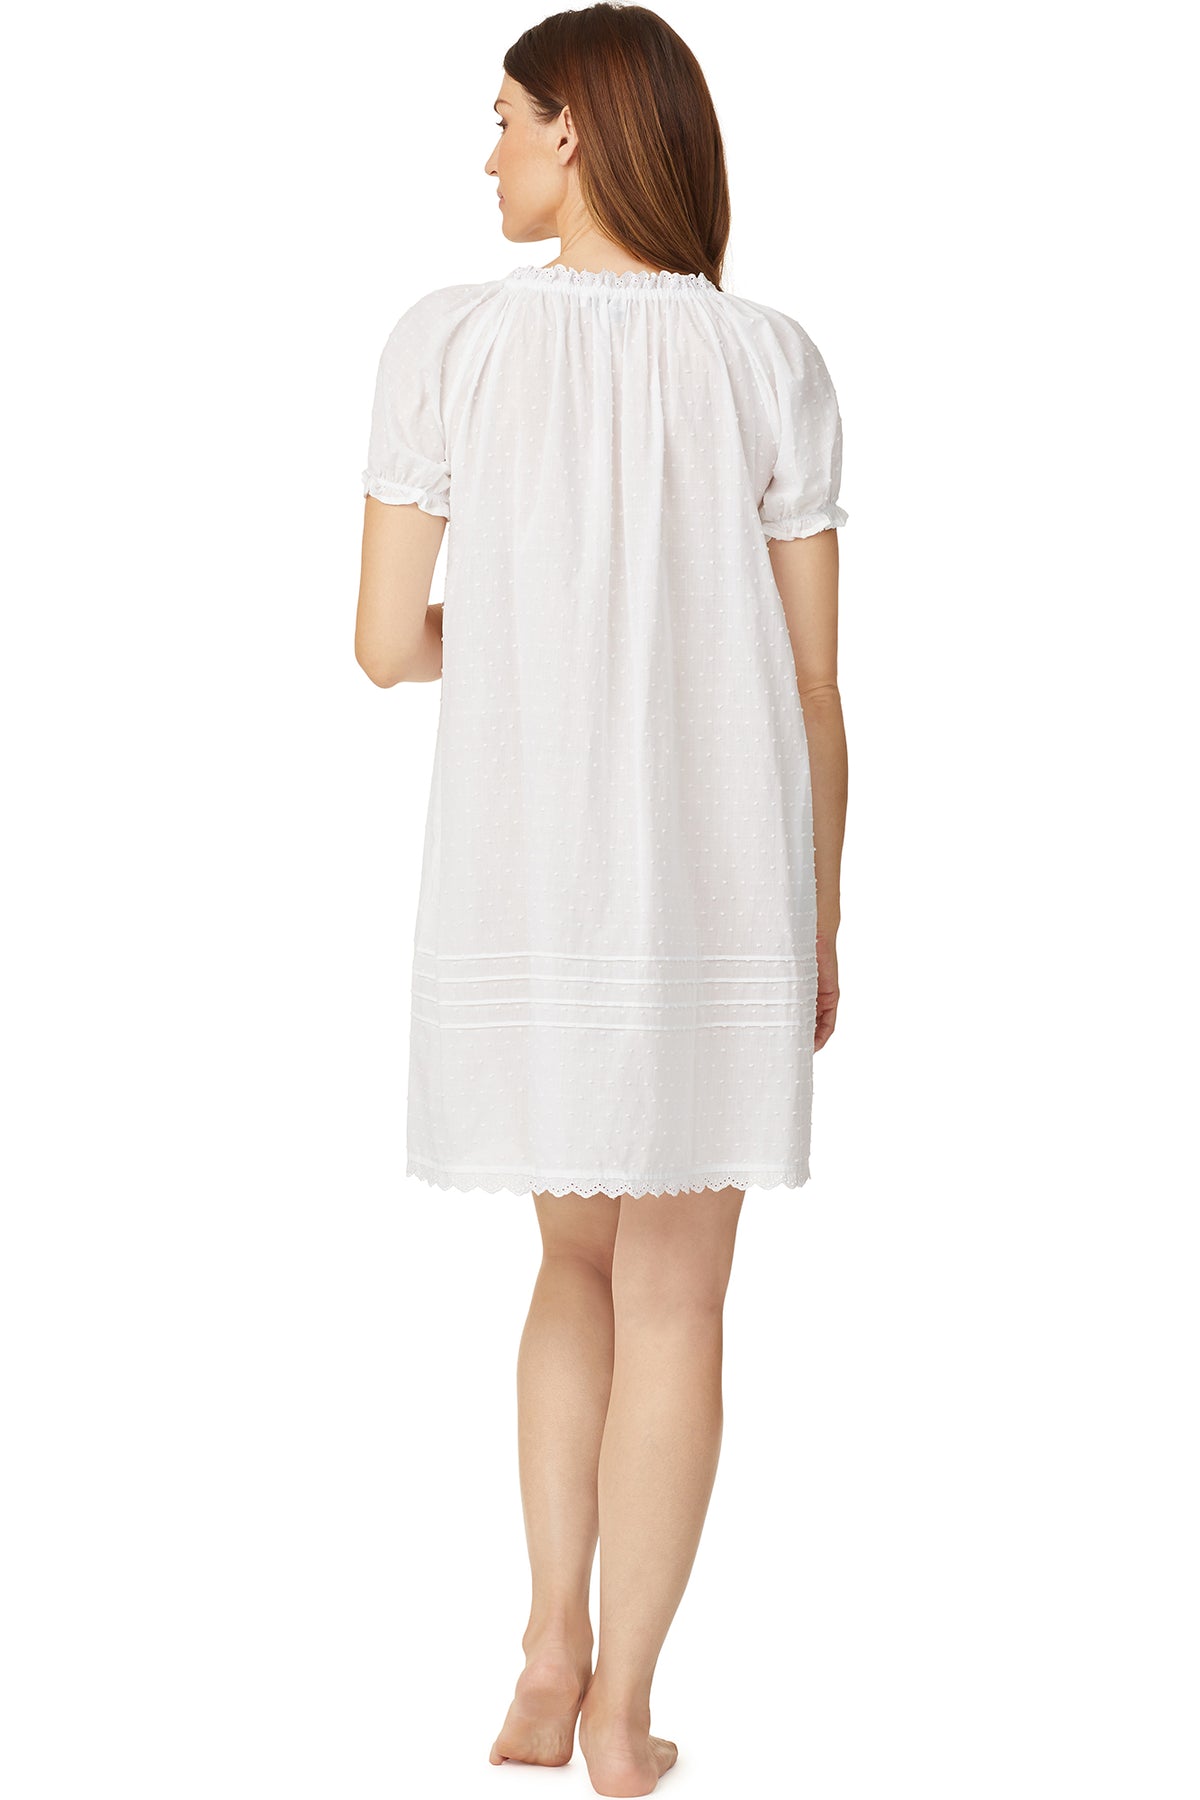 A lady wearing a white cap sleeve short nightdress with white dot pattern.